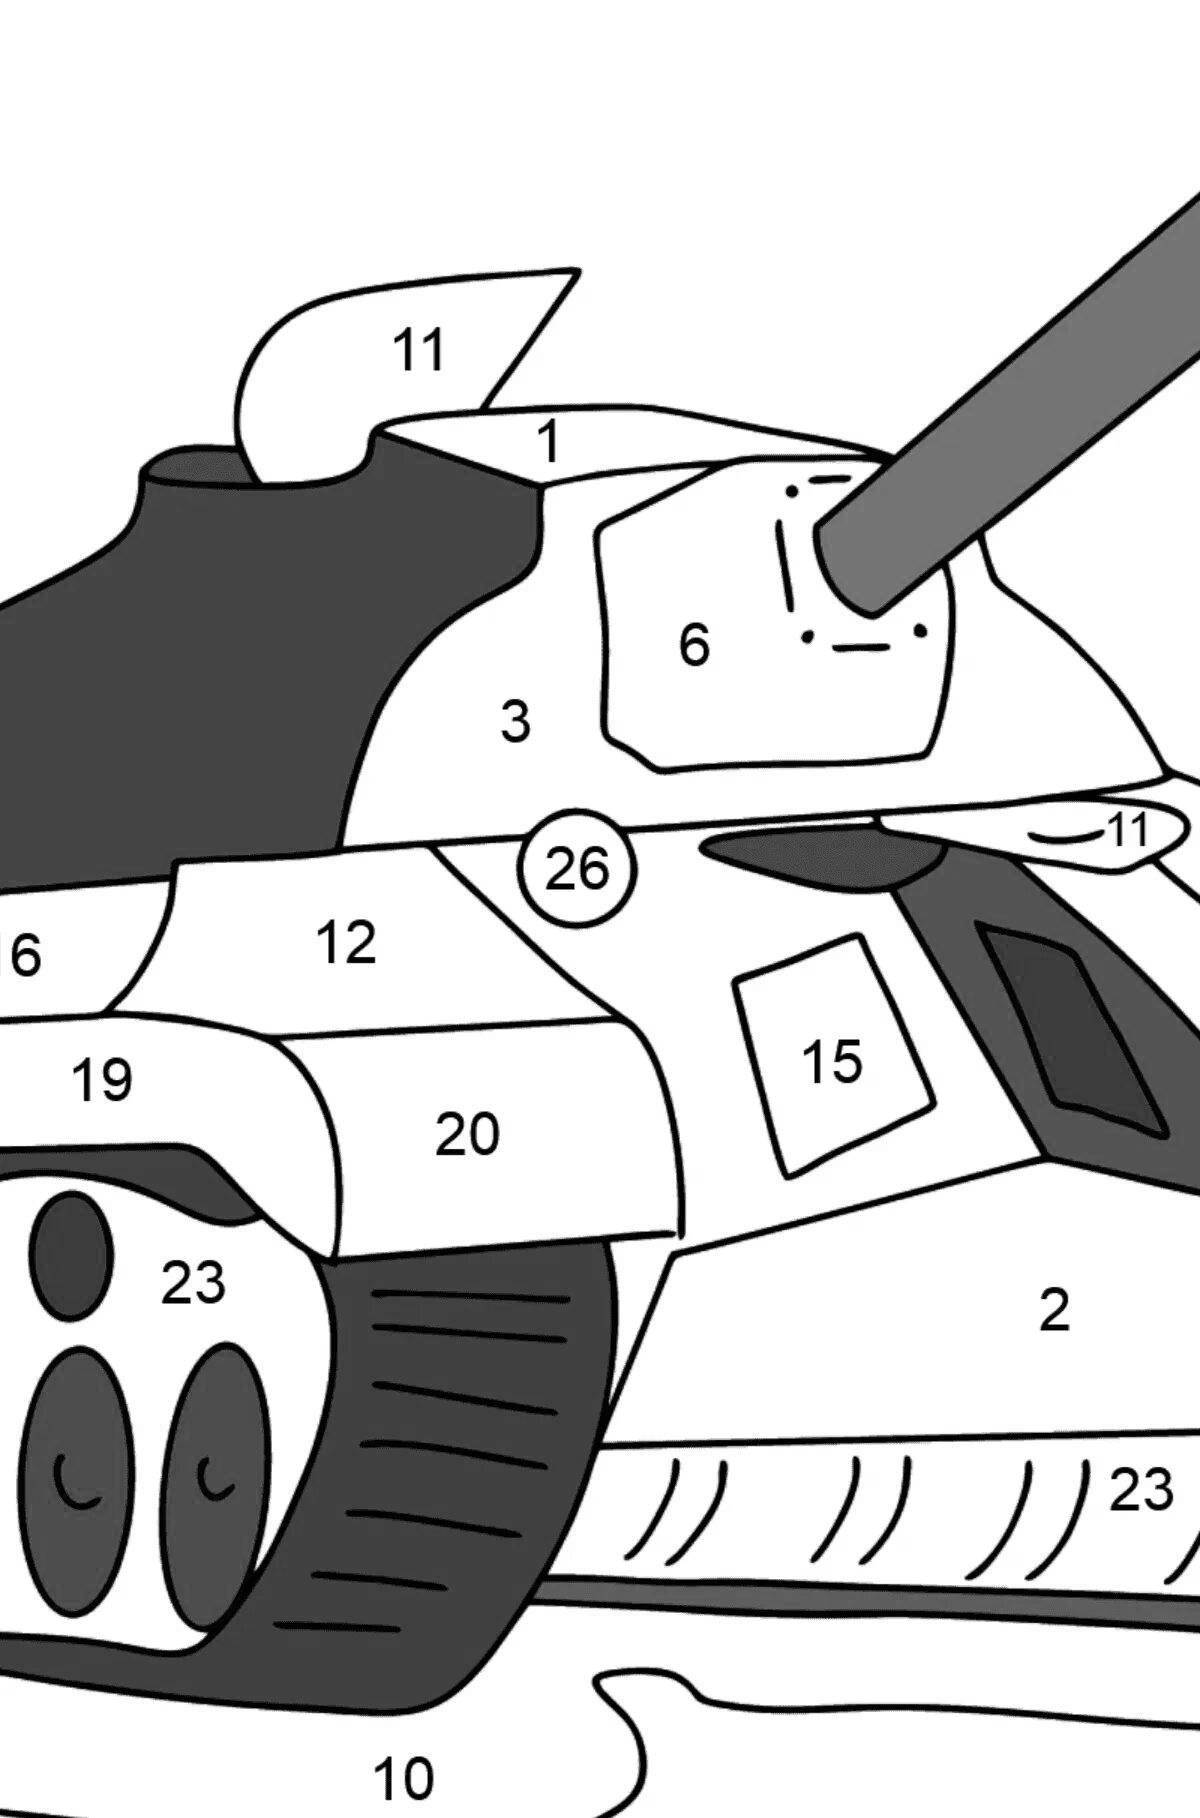 Charming tank by numbers coloring